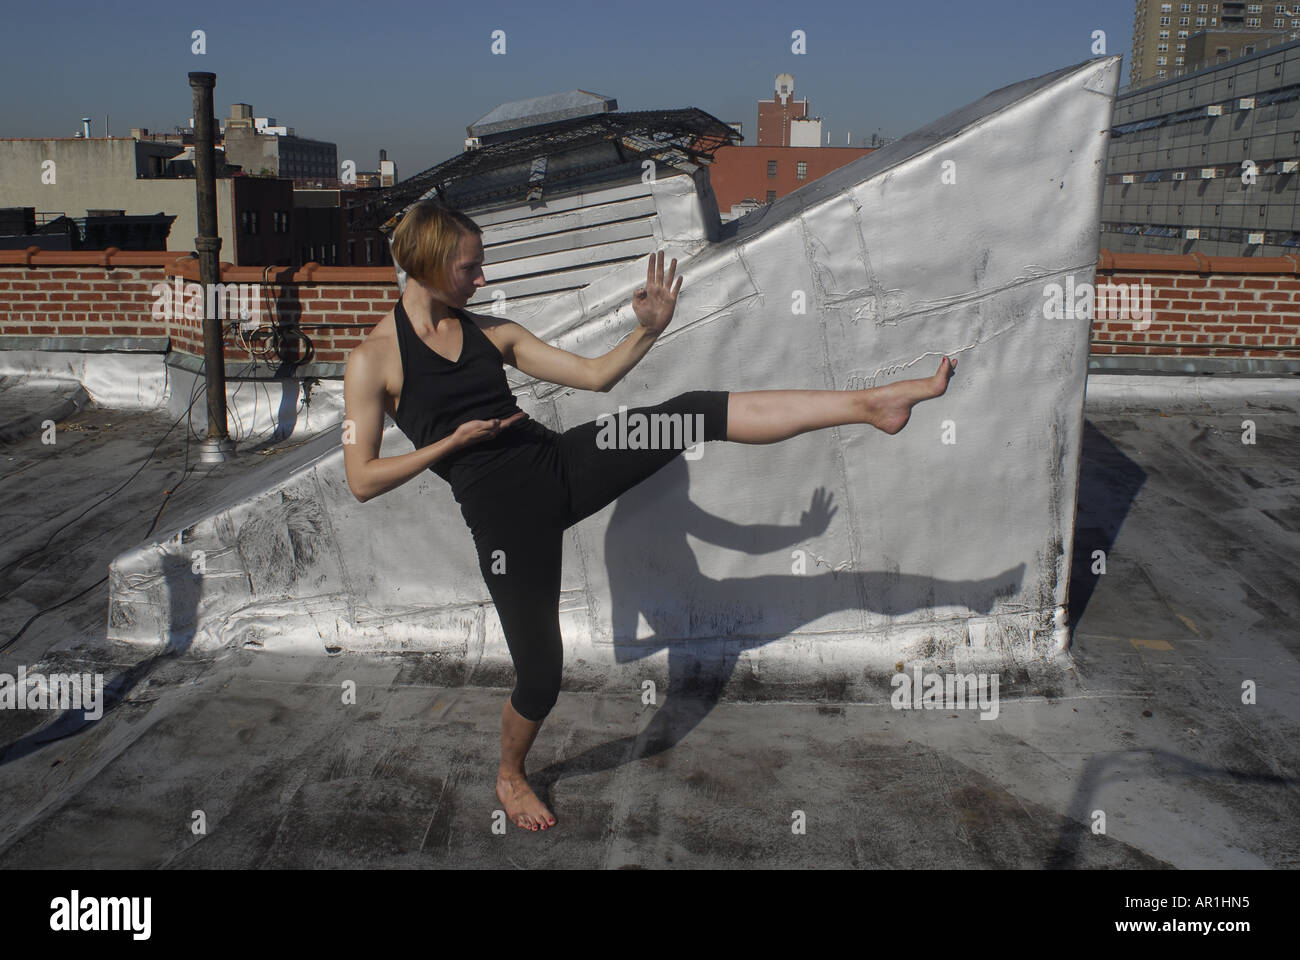 Model released New York CIty Thirty years old blond woman practising karate and martial arts in a sunny morning in mid town Man Stock Photo